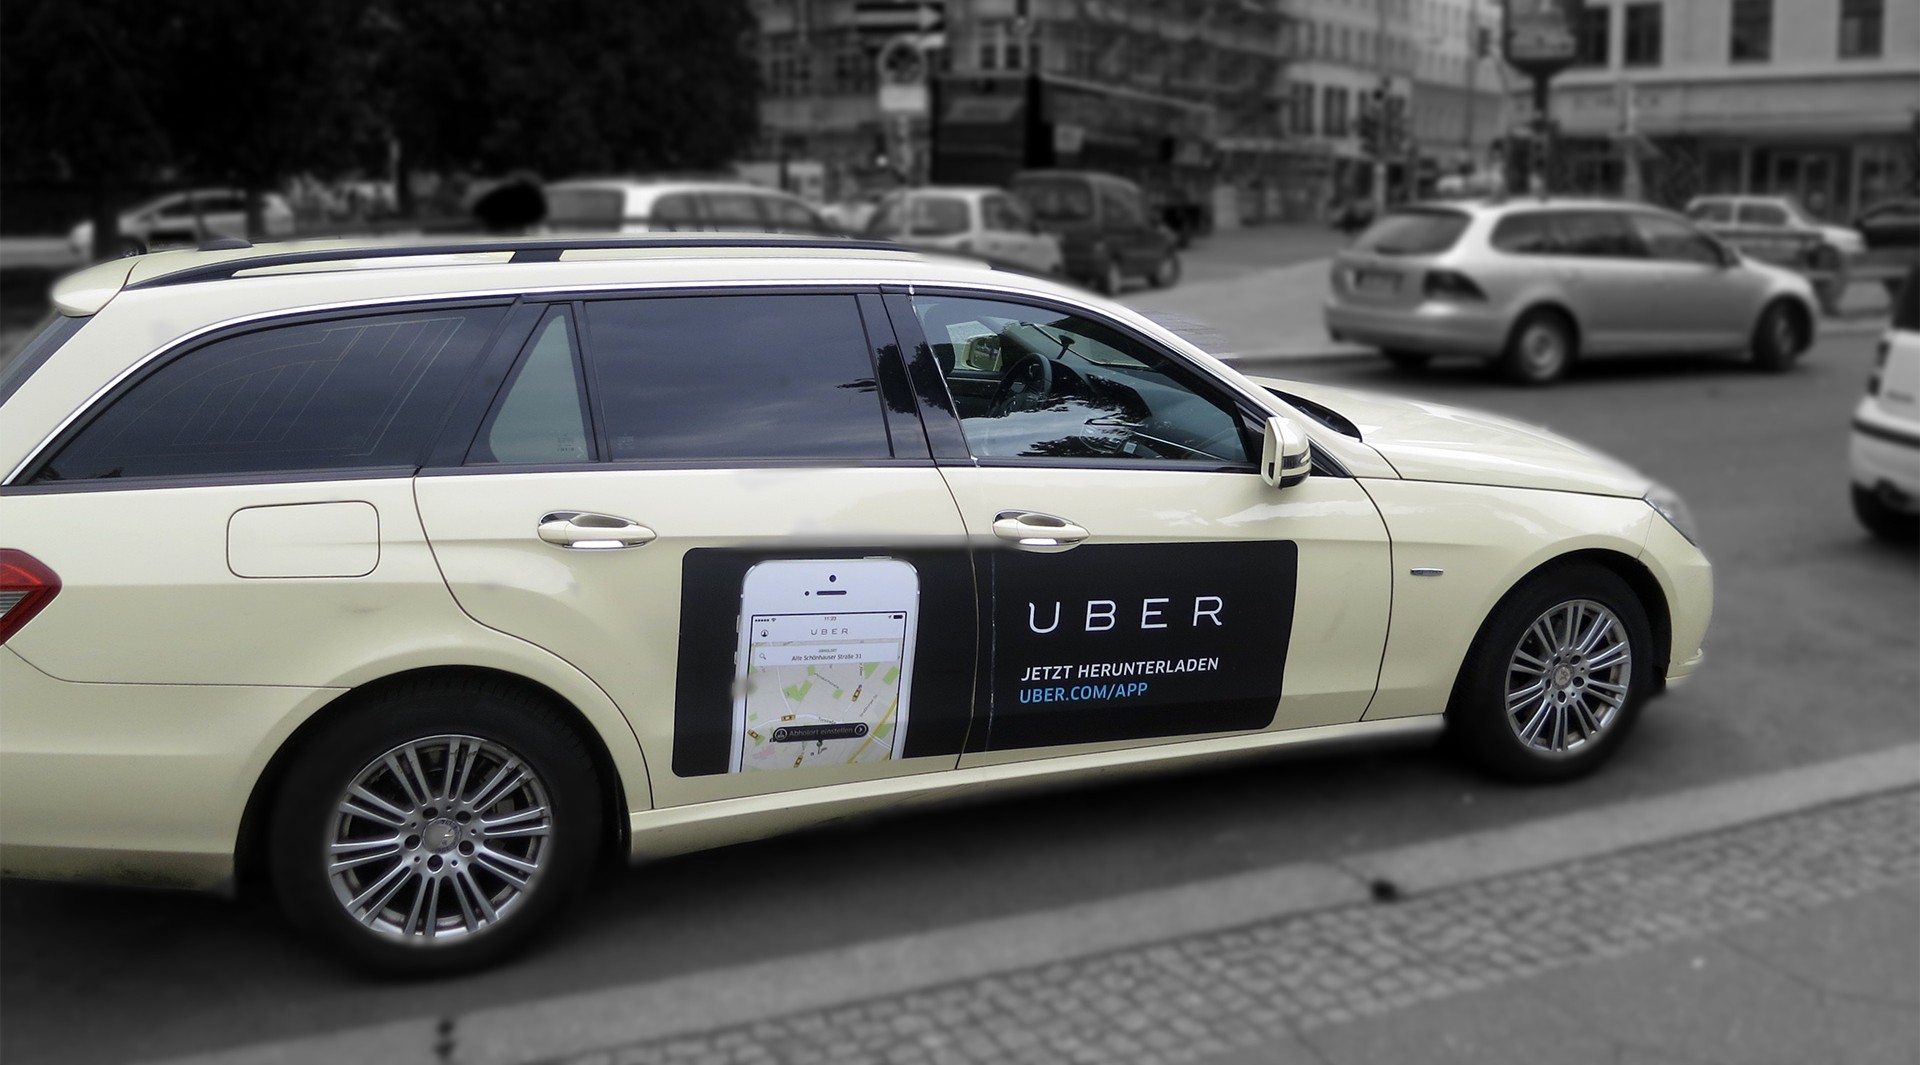 How i Hacked Uber, World's Biggest Taxi Company